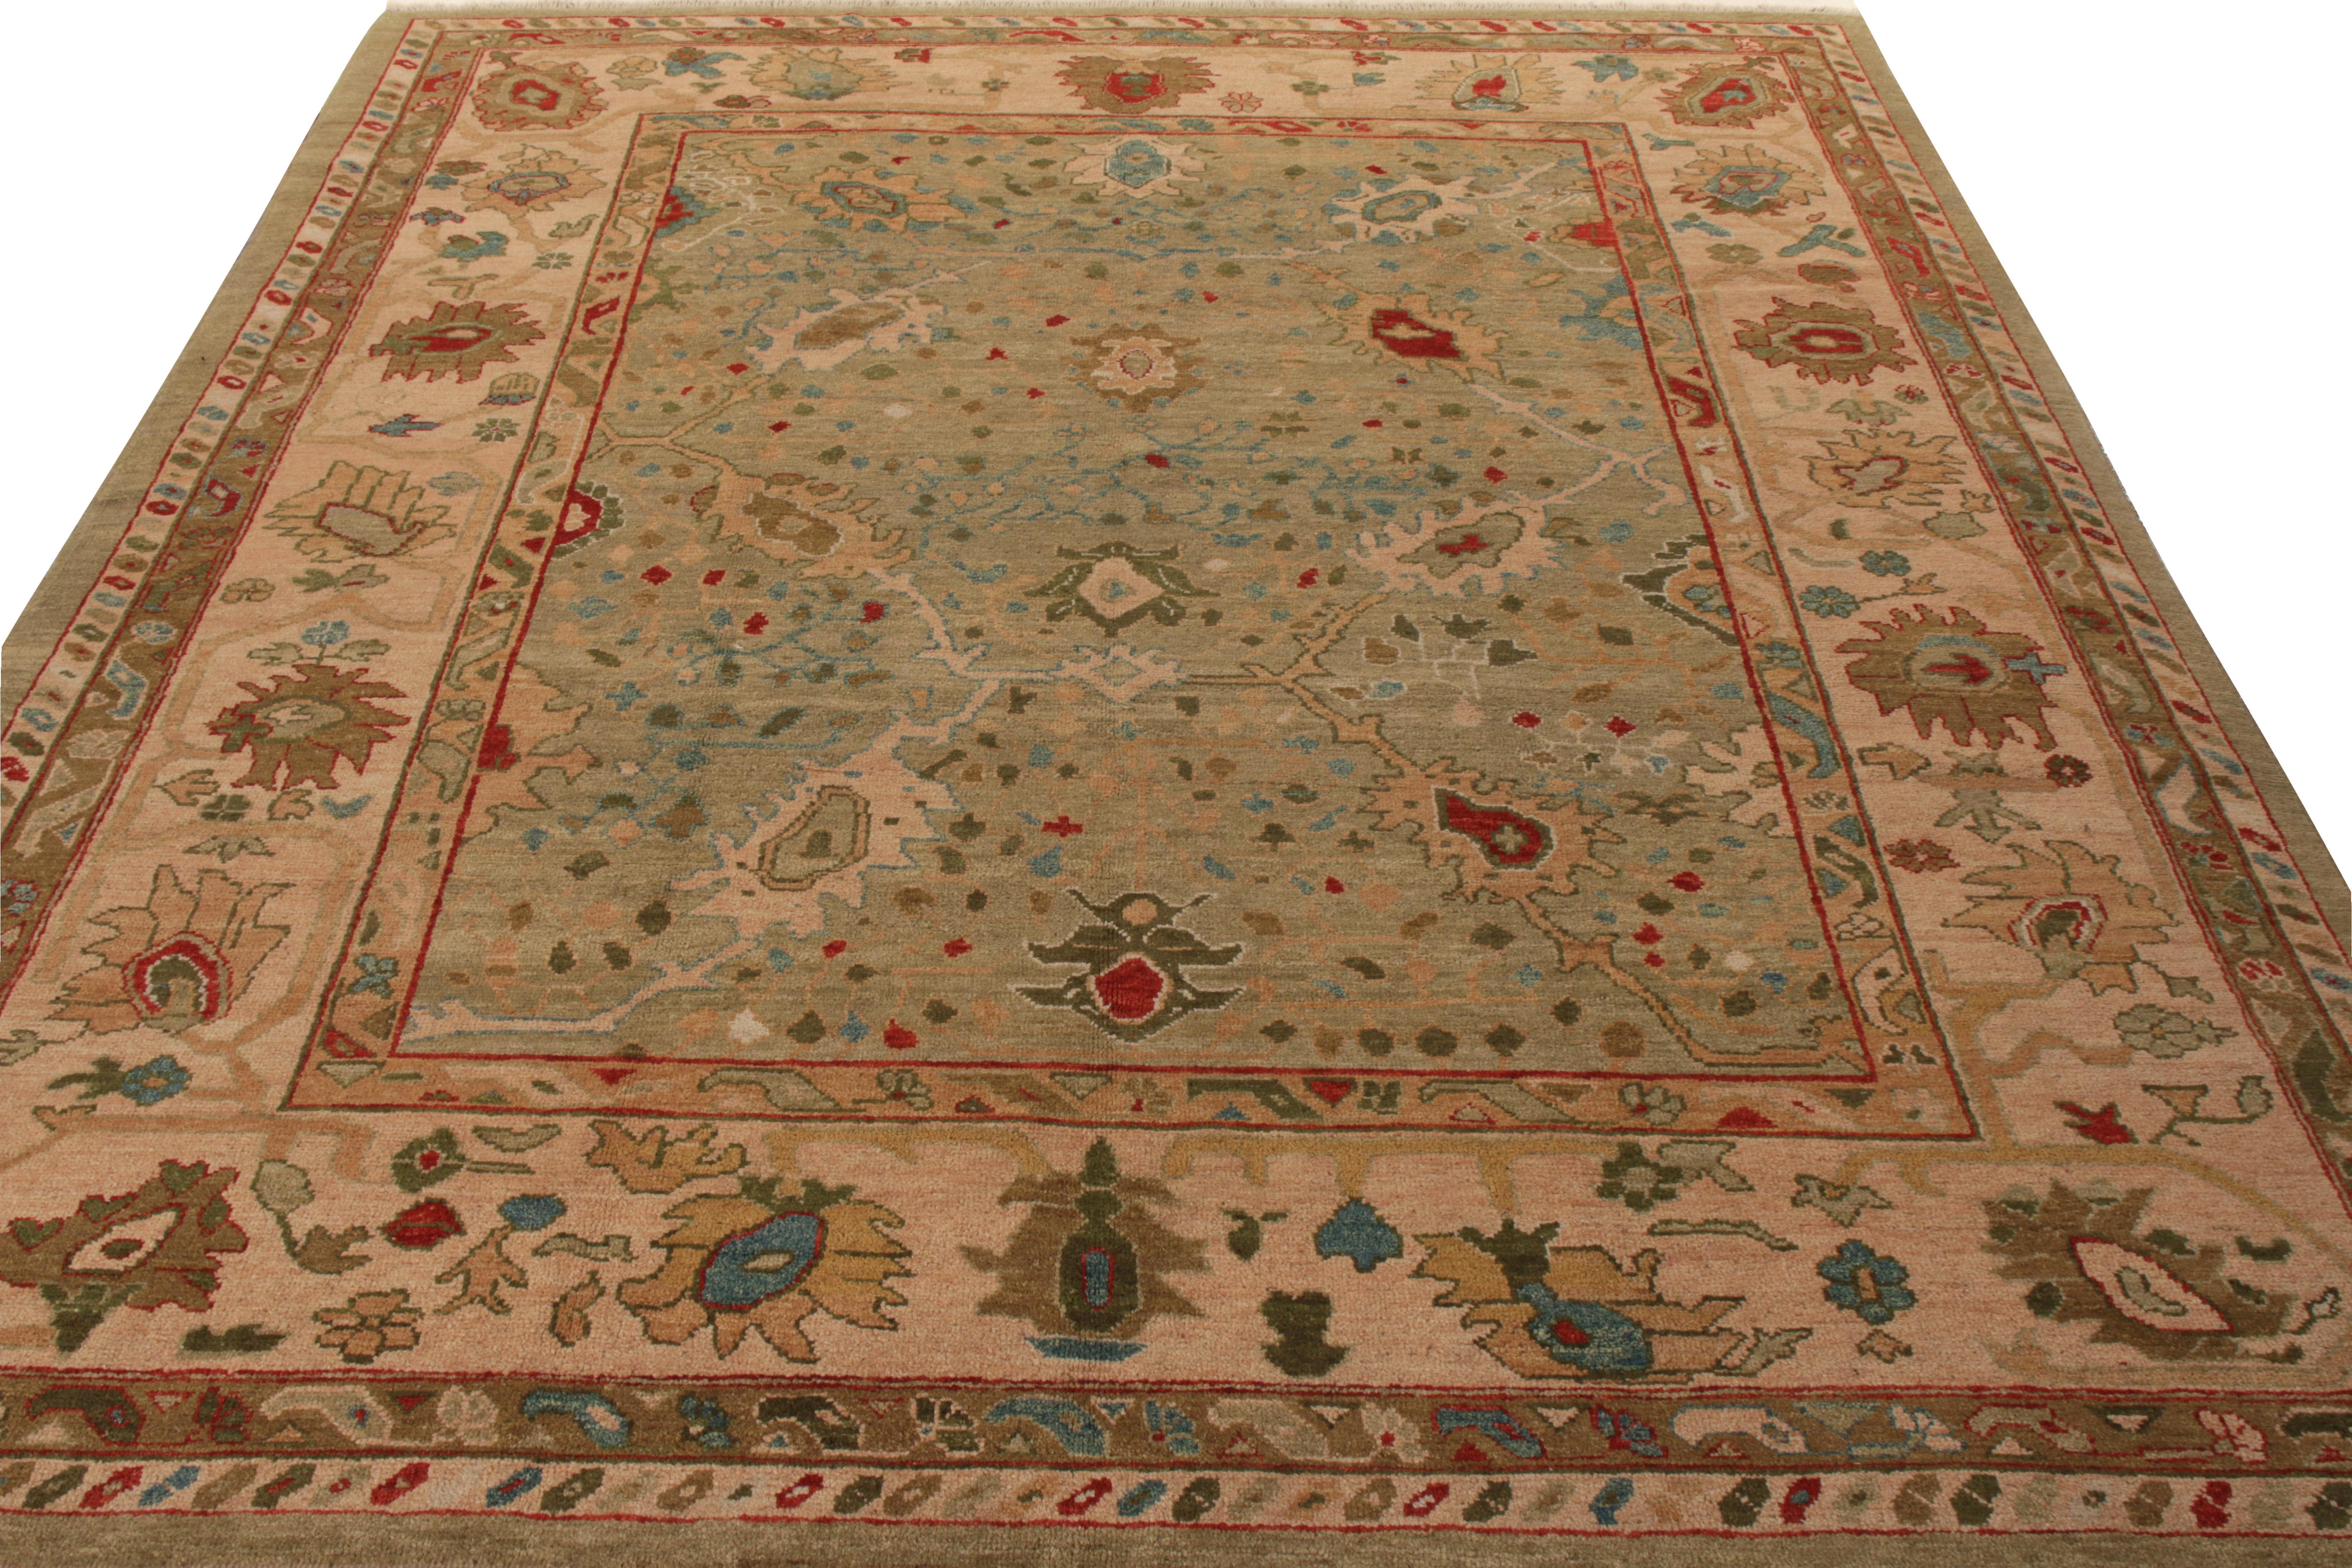 A 9×10 vintage Turkish Oushak style rug from Rug & Kilim’s Modern Classics Collection.

Hand knotted in wool, the rug is an impeccable drawing from the works of George Ravmamovich inspired by transitional Oushak rug styles, enjoying regal floral